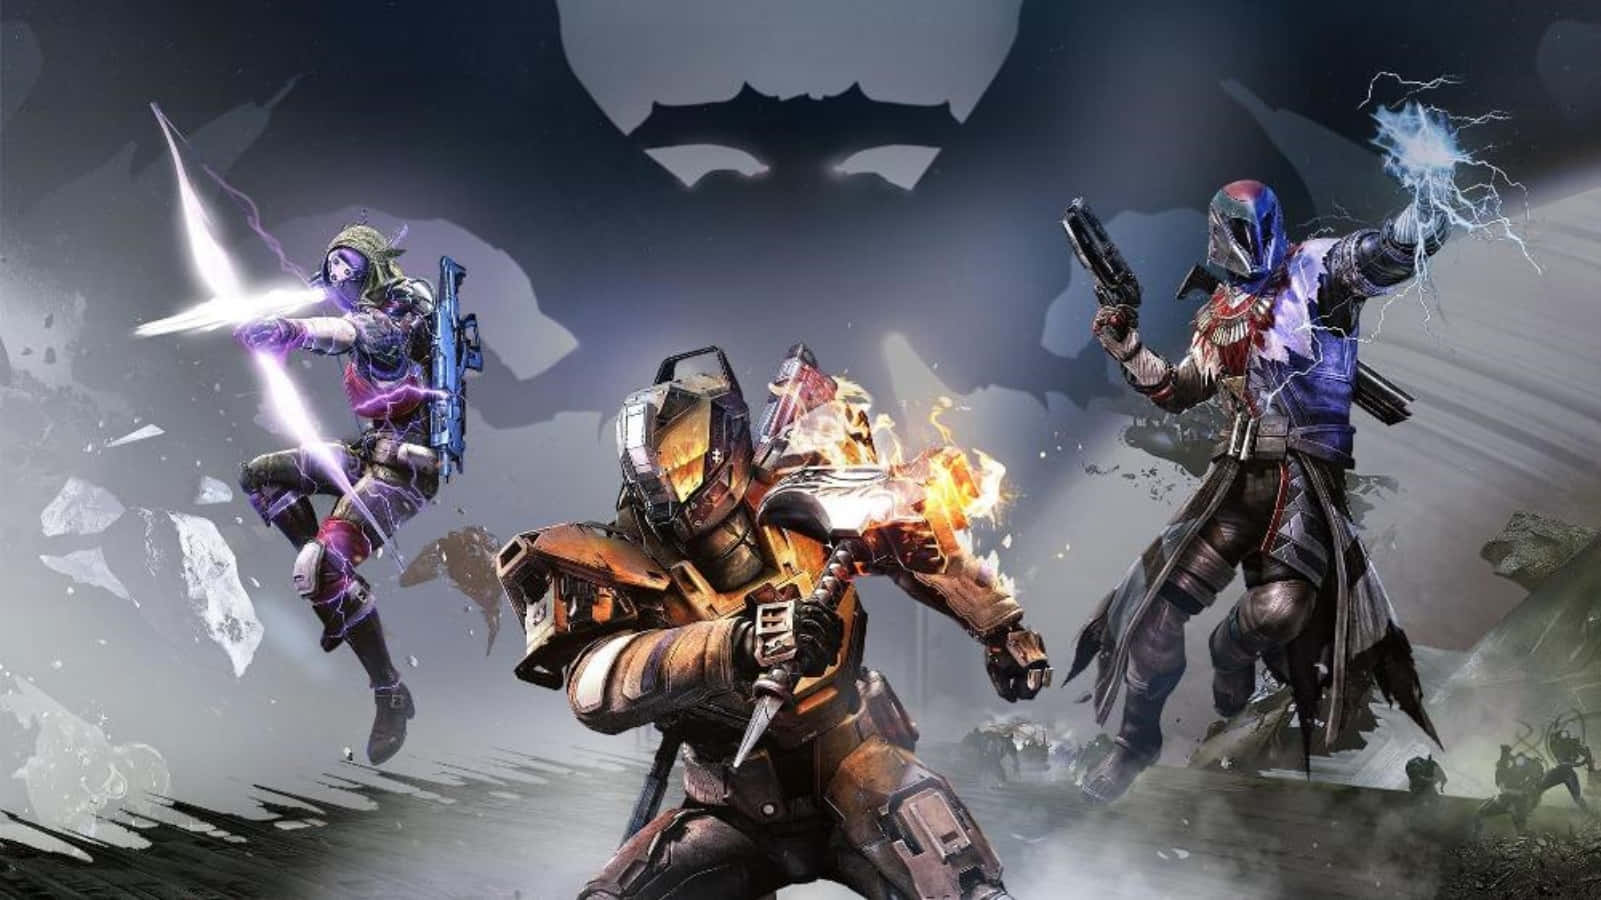 Destiny Characters in Action Wallpaper